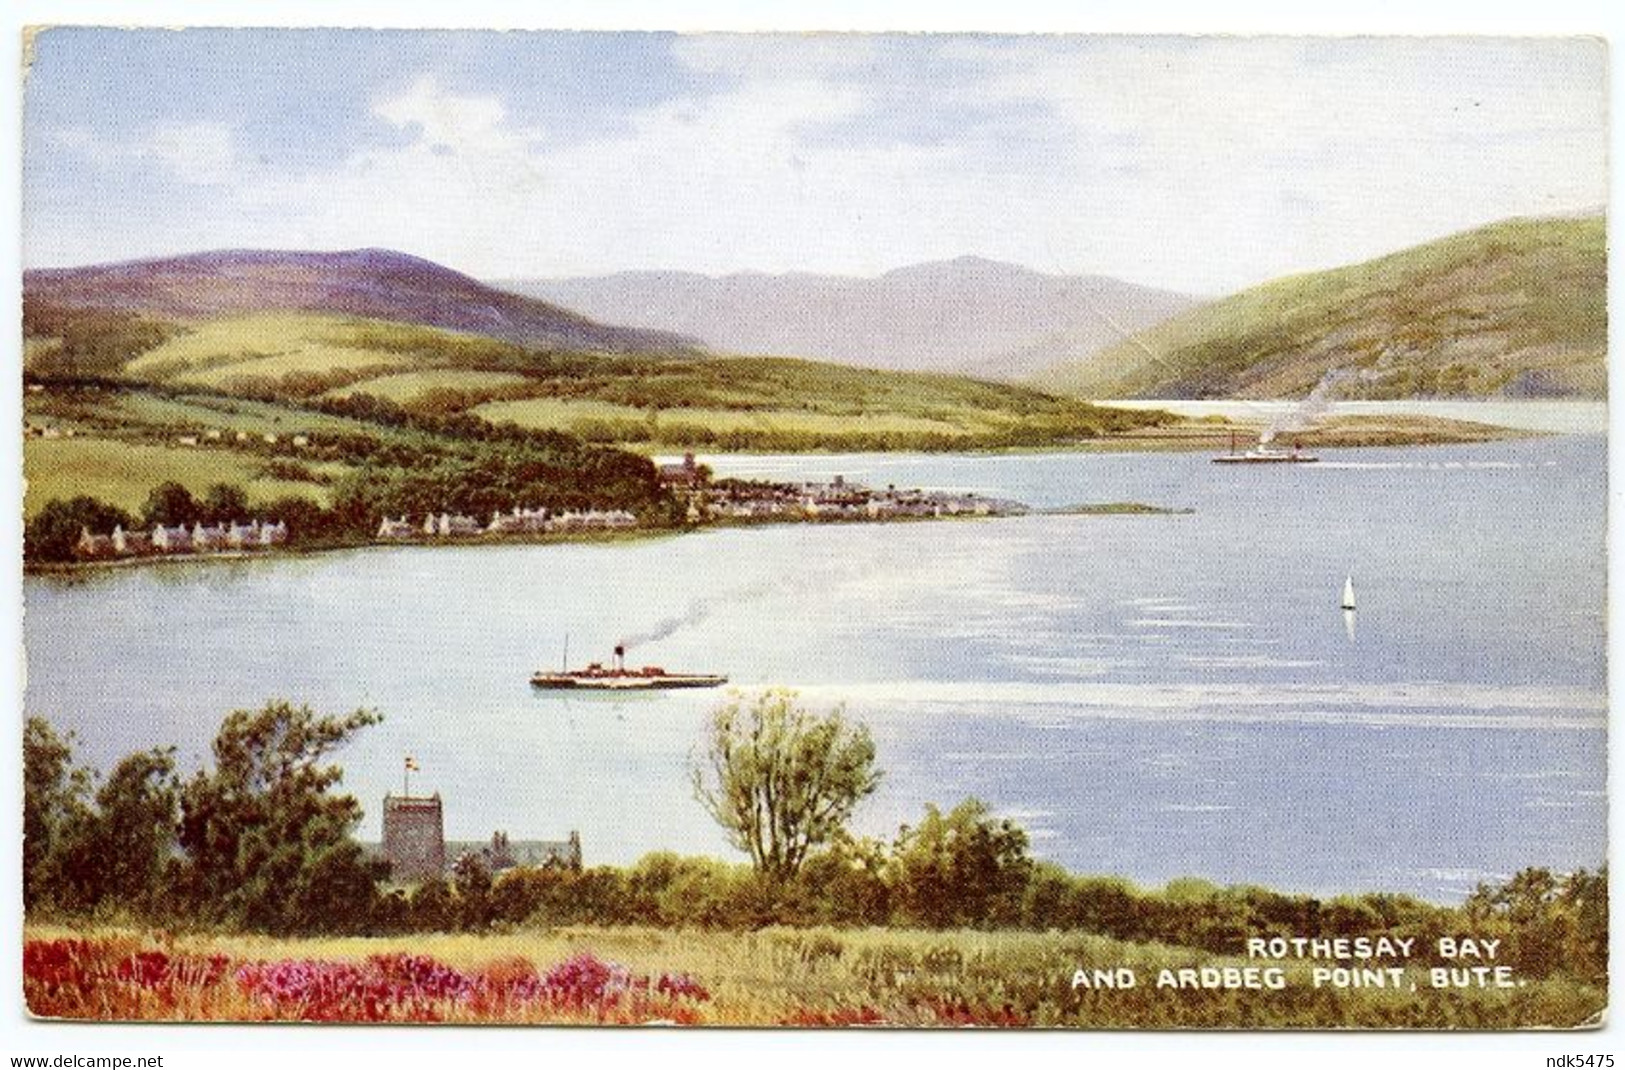 ARTIST CARD : BUTE - ROTHESAY BAY AND ARBEG POINT - Bute